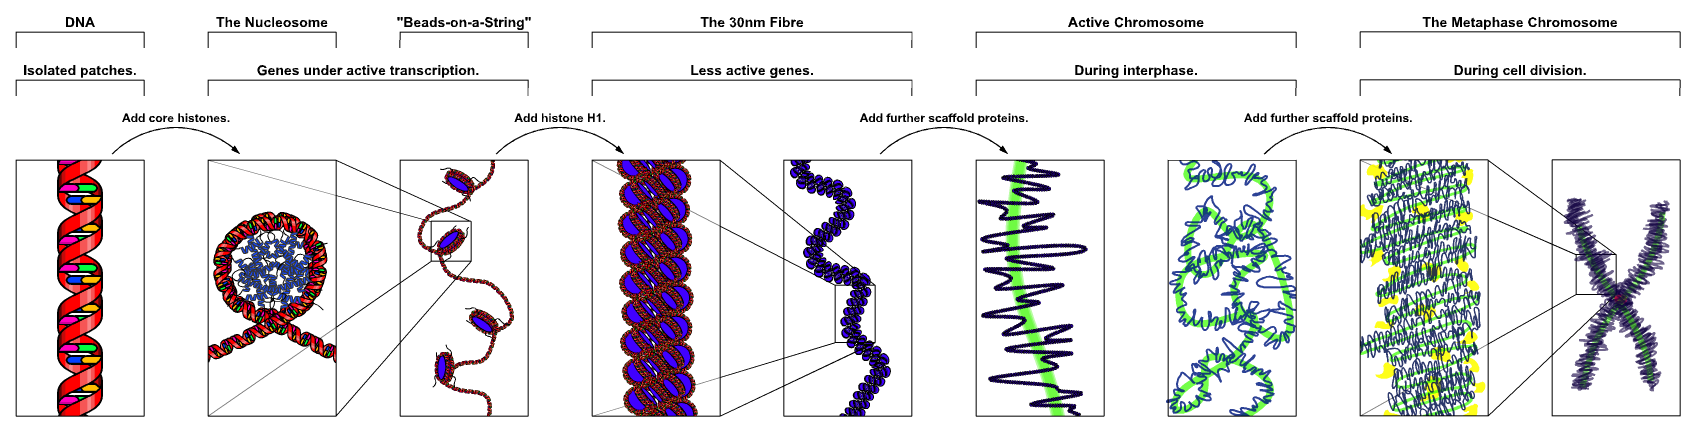 The major structures in DNA compaction: DNA, the nucleosome, the 10 nm “beads-on-a-string” fibre, the 30 nm fibre and the metaphase chromosome.